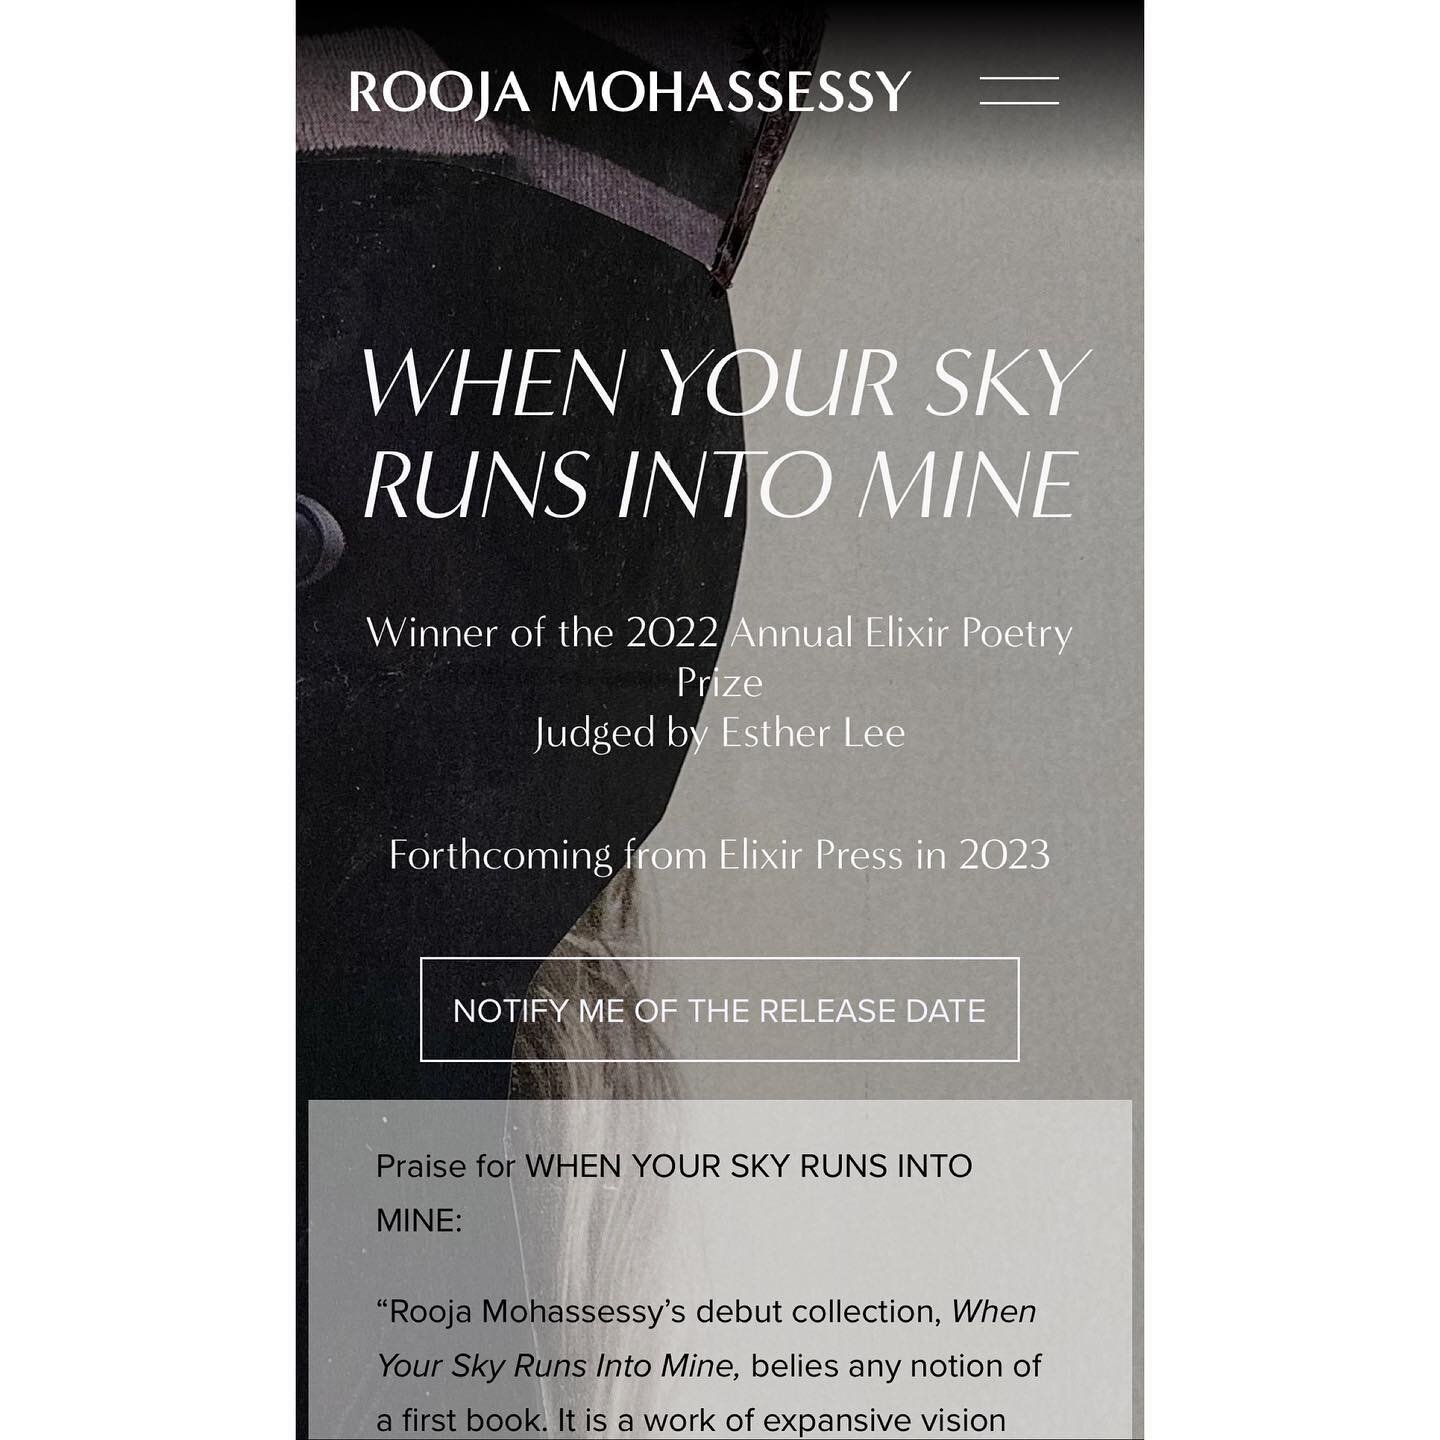 Friends, wanted to share some good news of me. My debut poetry collection, WHEN YOUR SKY RUNS INTO MINE, has won the 2022 #elixirpoetry Prize, judged by Esther Lee. It will be released by Elixir Press out of Denver in January 2023. A heartfelt thank 